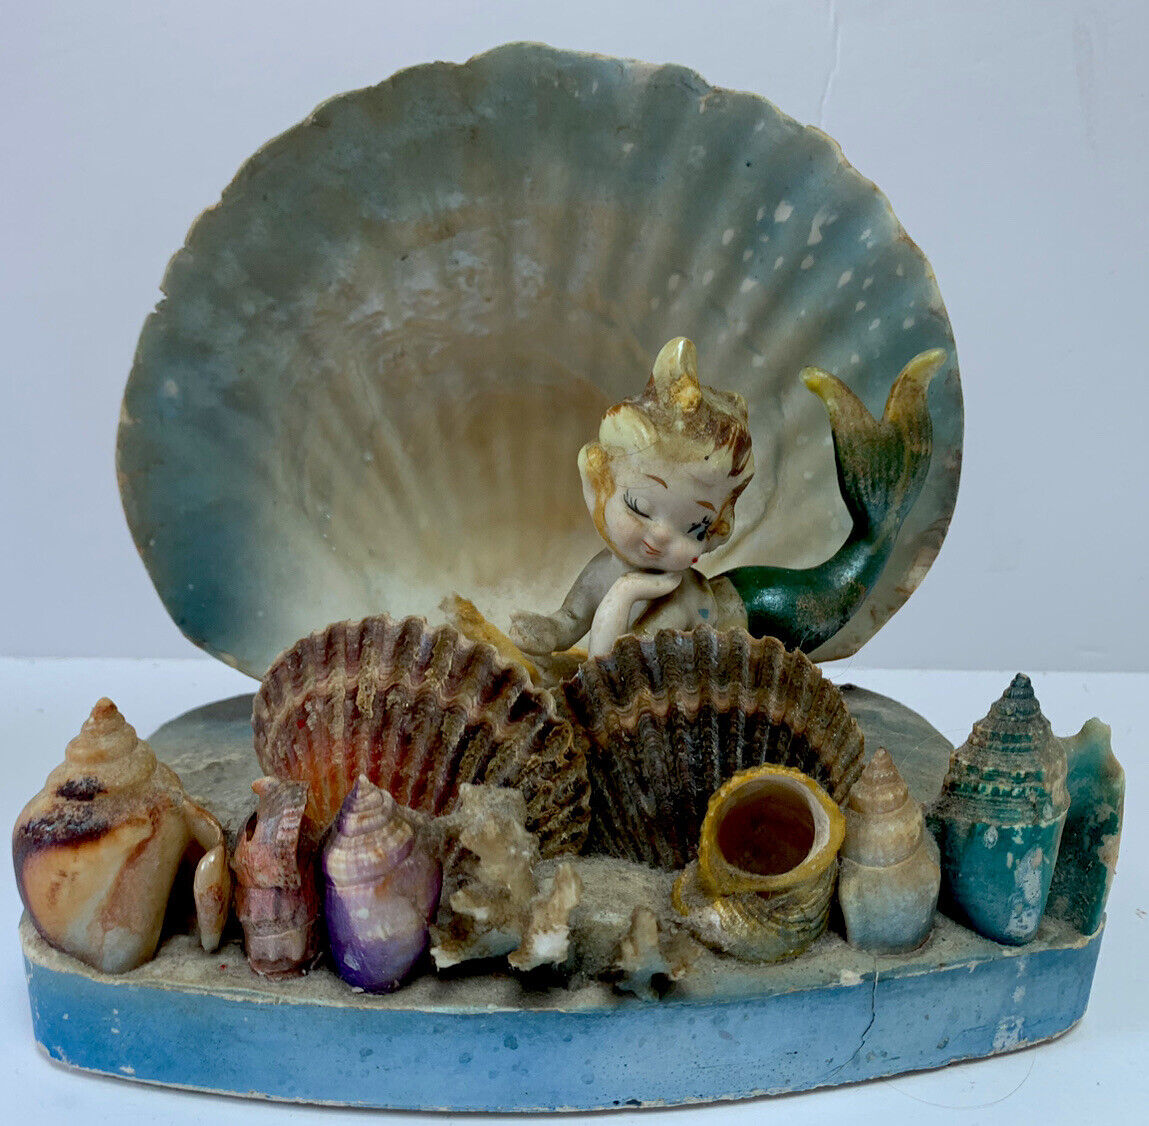 Vintage Winking Bradley Mermaid on Shells With Coral Sand Sculpture